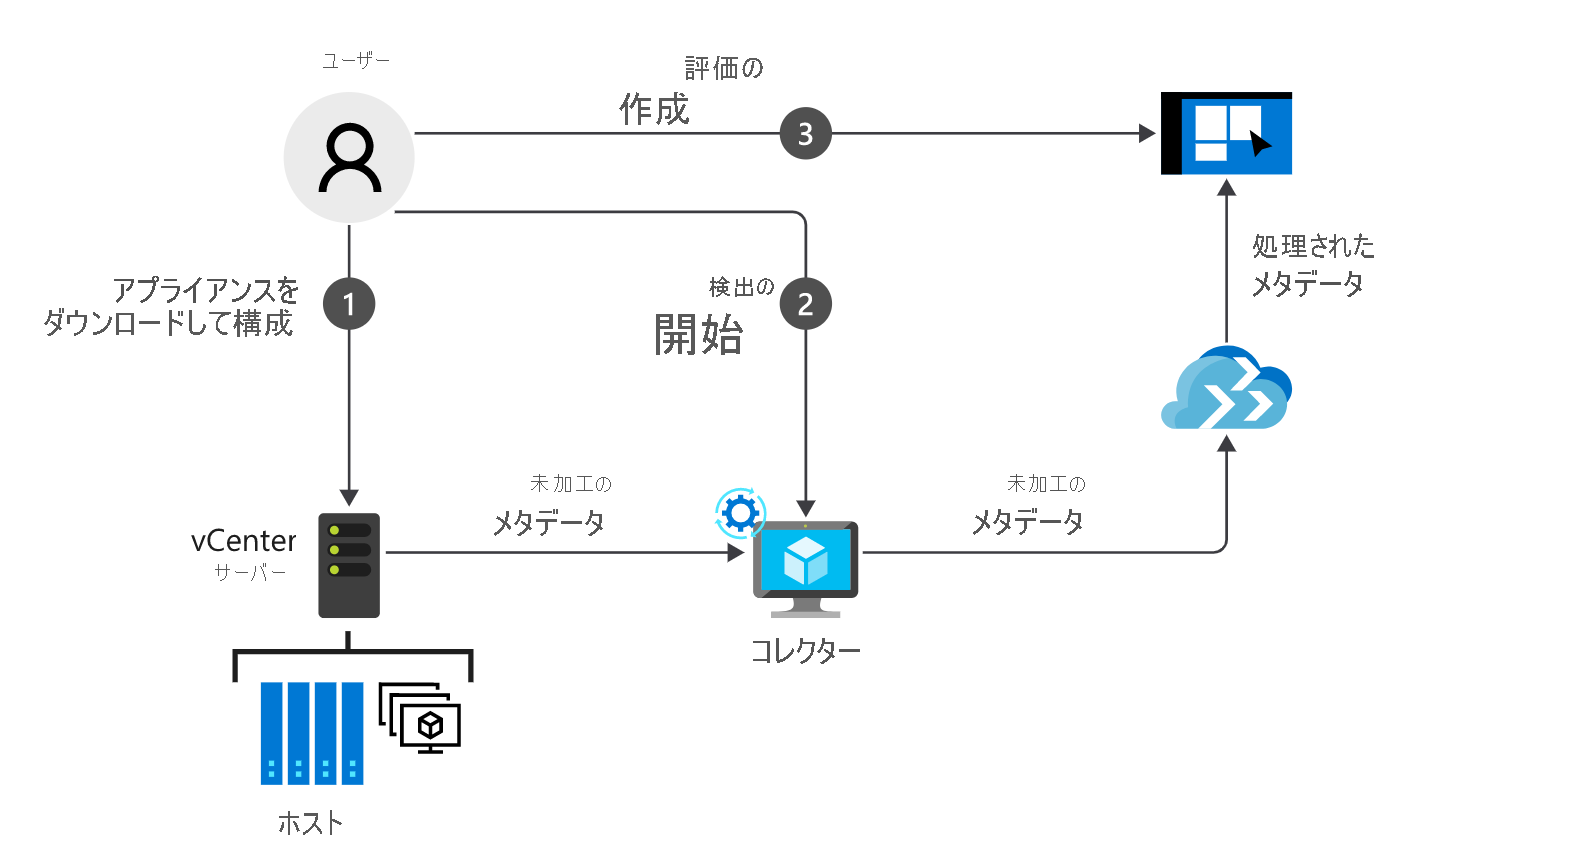 Flowchart that shows how to do server assessment with the Azure Migrate Server Assessment tool.